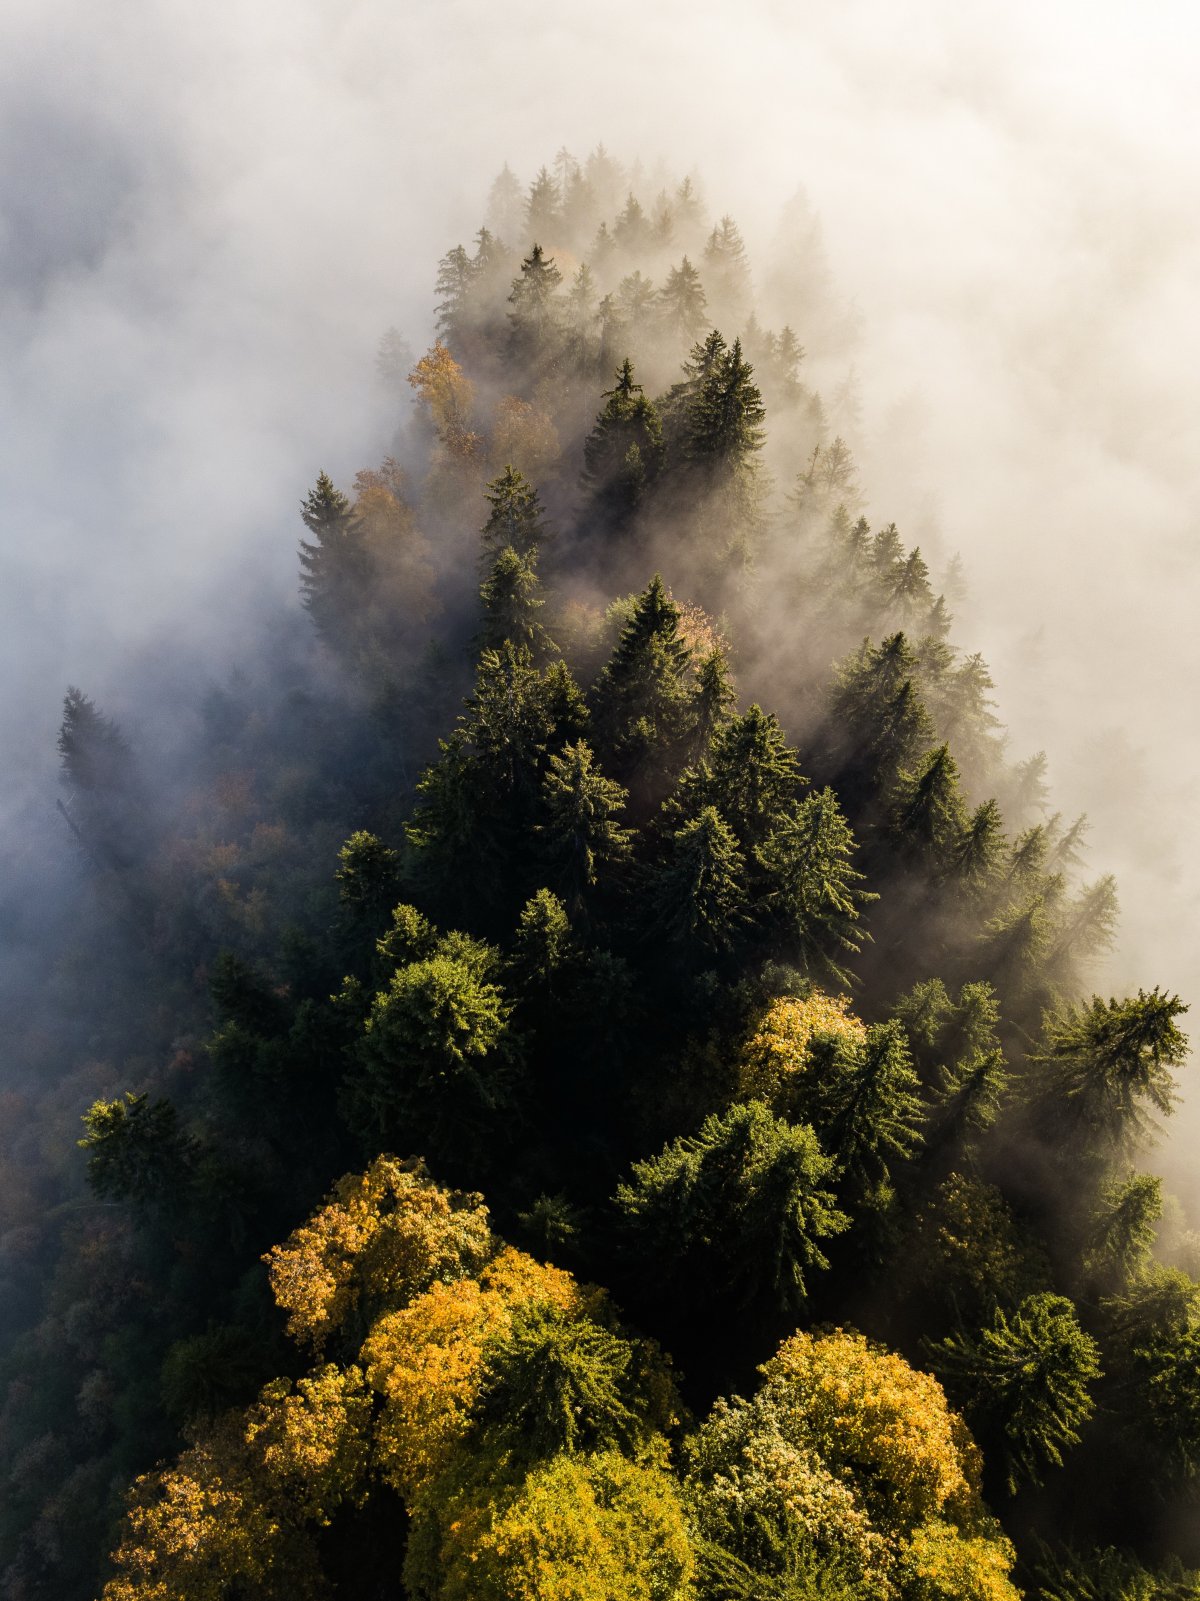 Scenery pictures of woods in clouds and fog